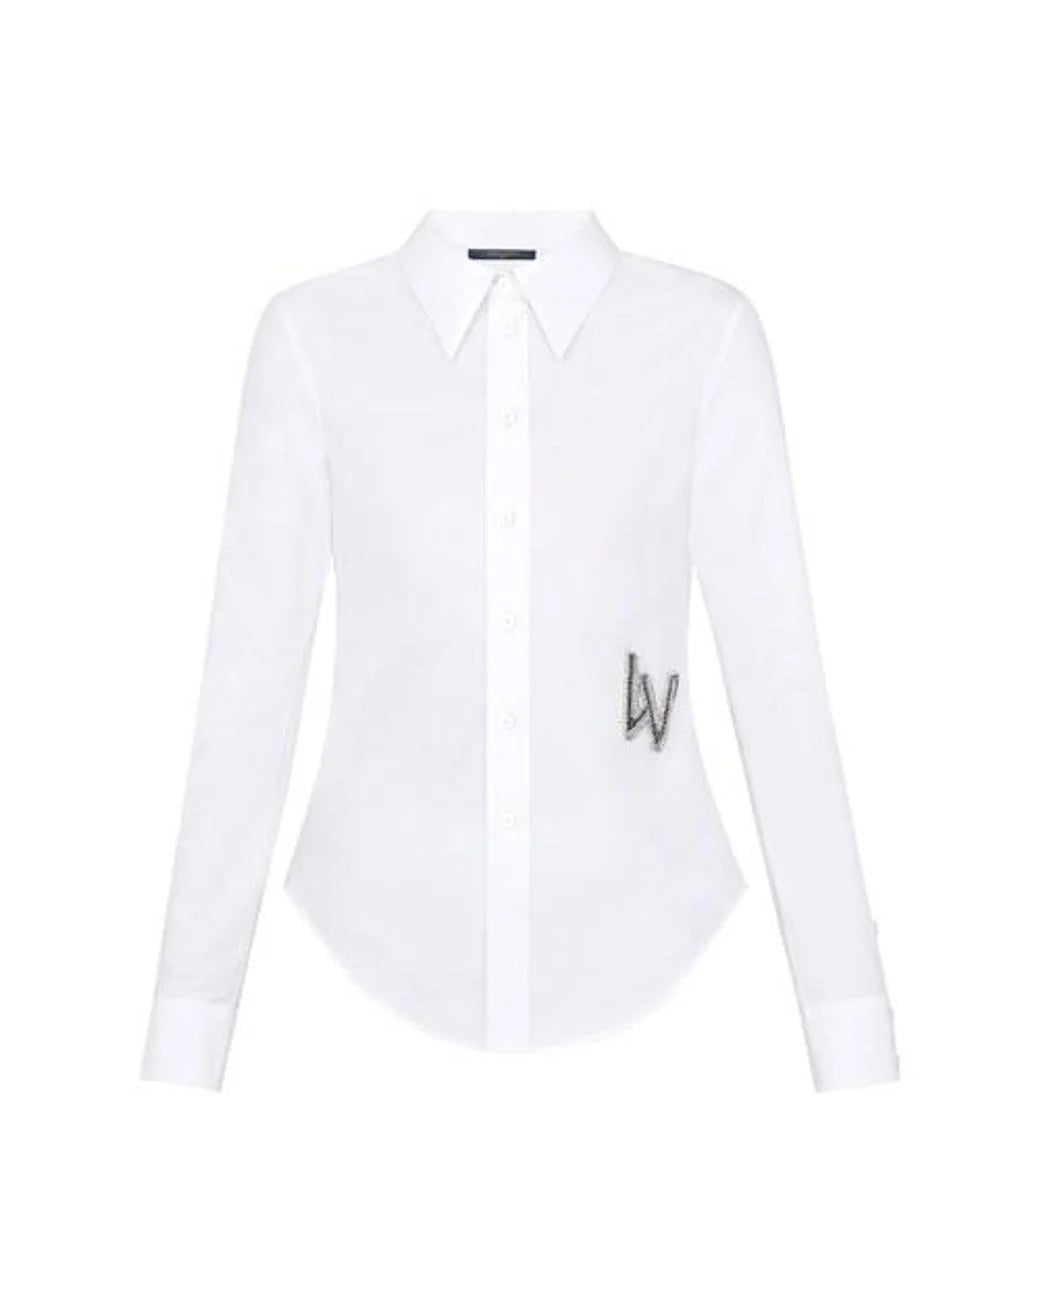 LOUIS VUITTON EMBROIDERED LV LOGO FITTED SHIRT – Caroline's